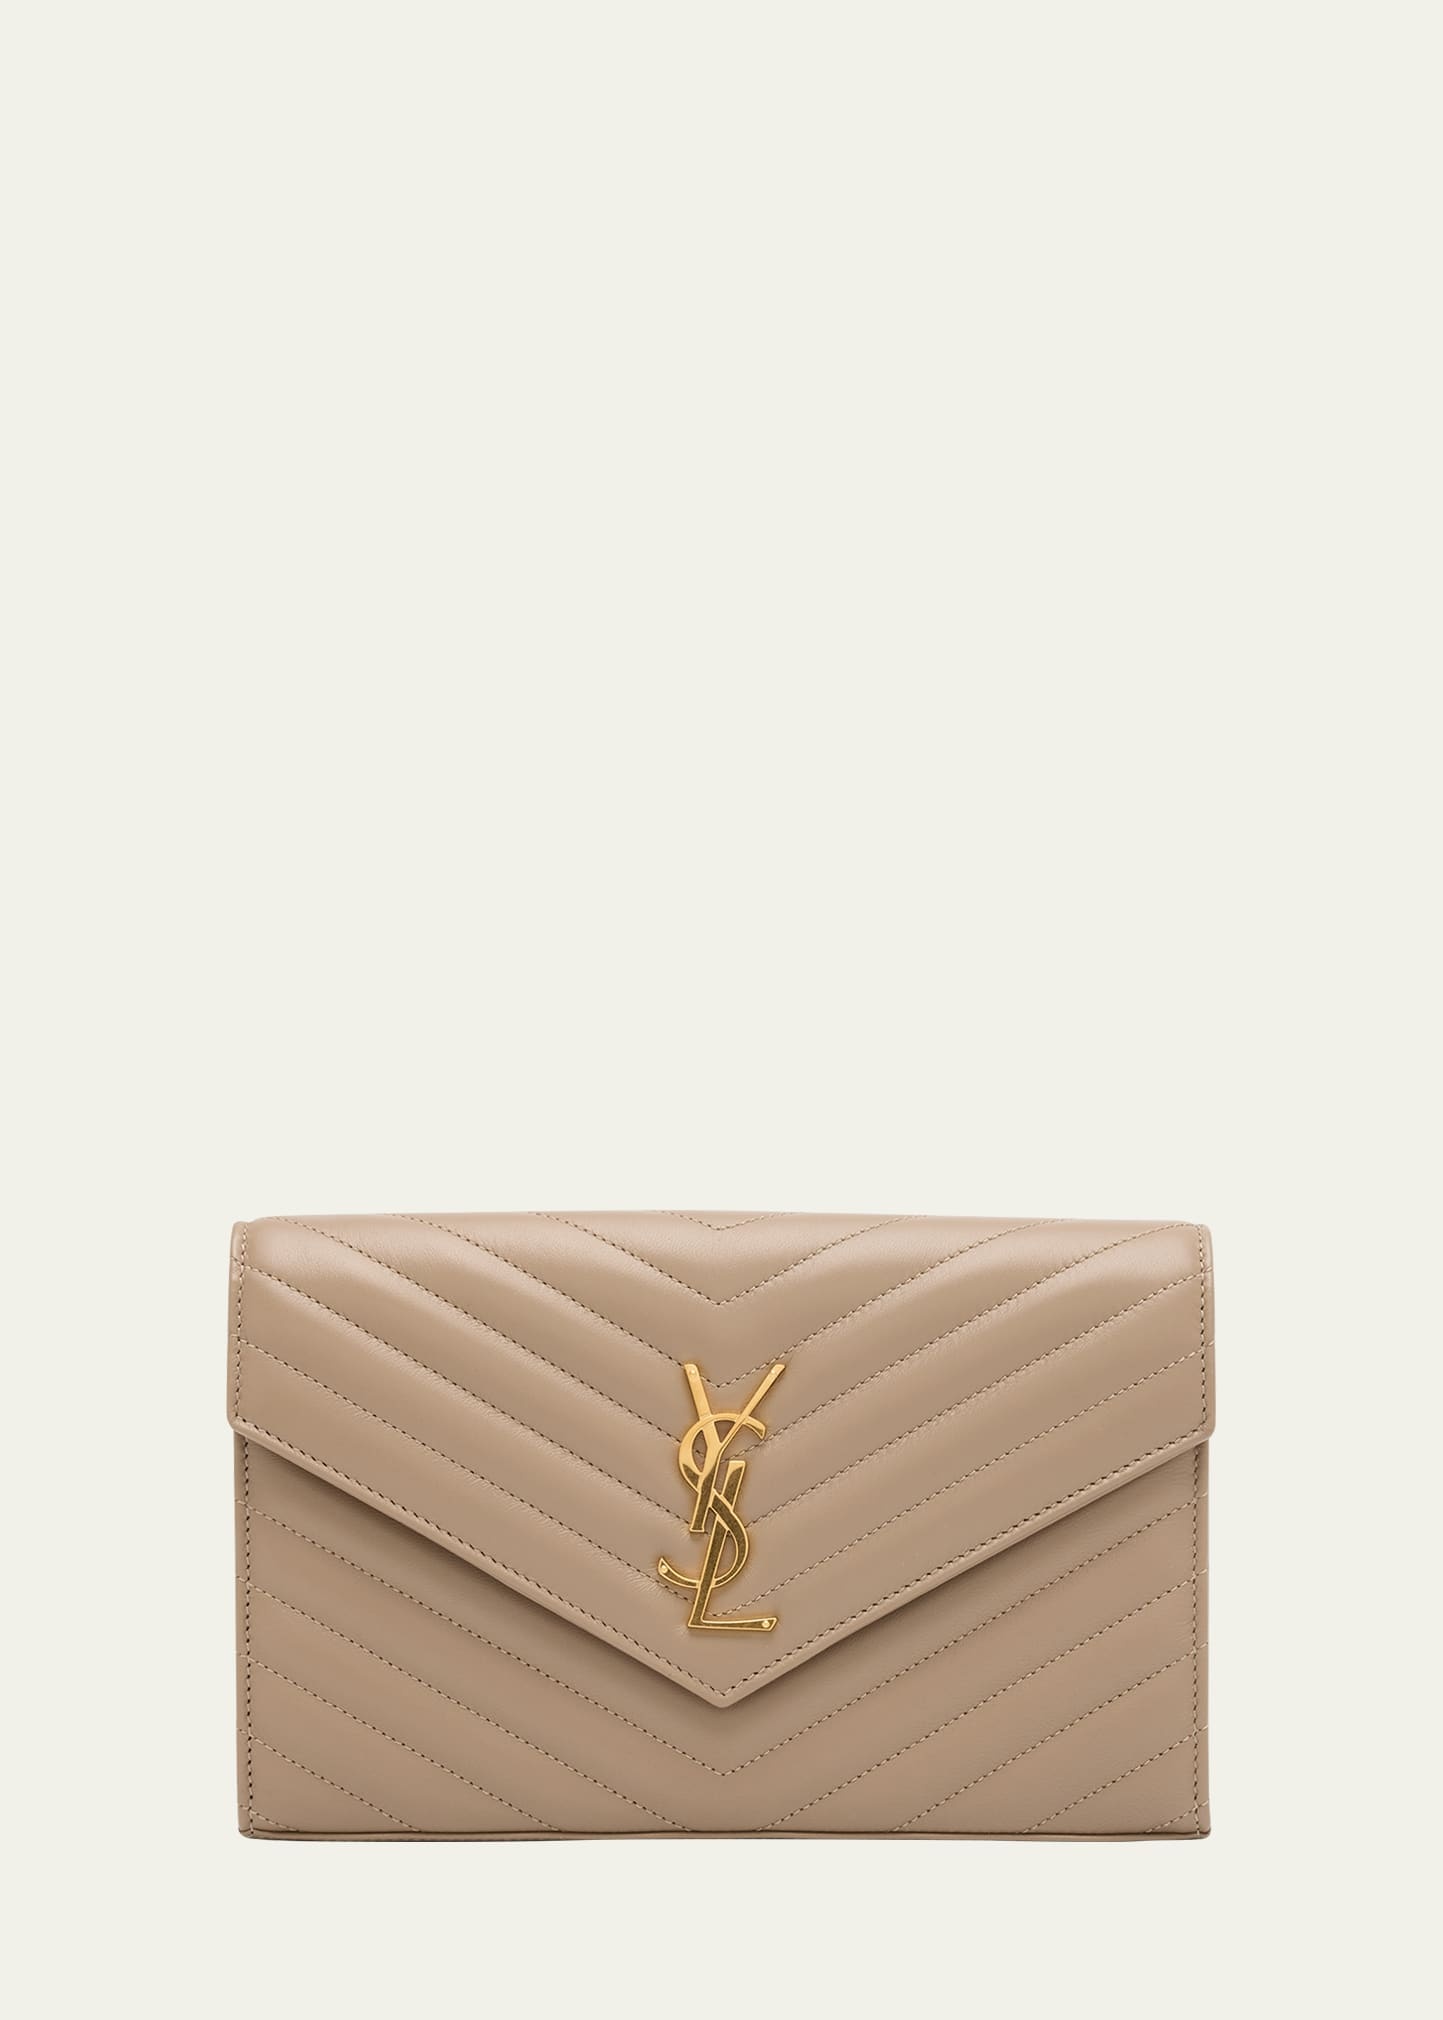 YSL Monogram Large Wallet on Chain in Smooth Leather - 1